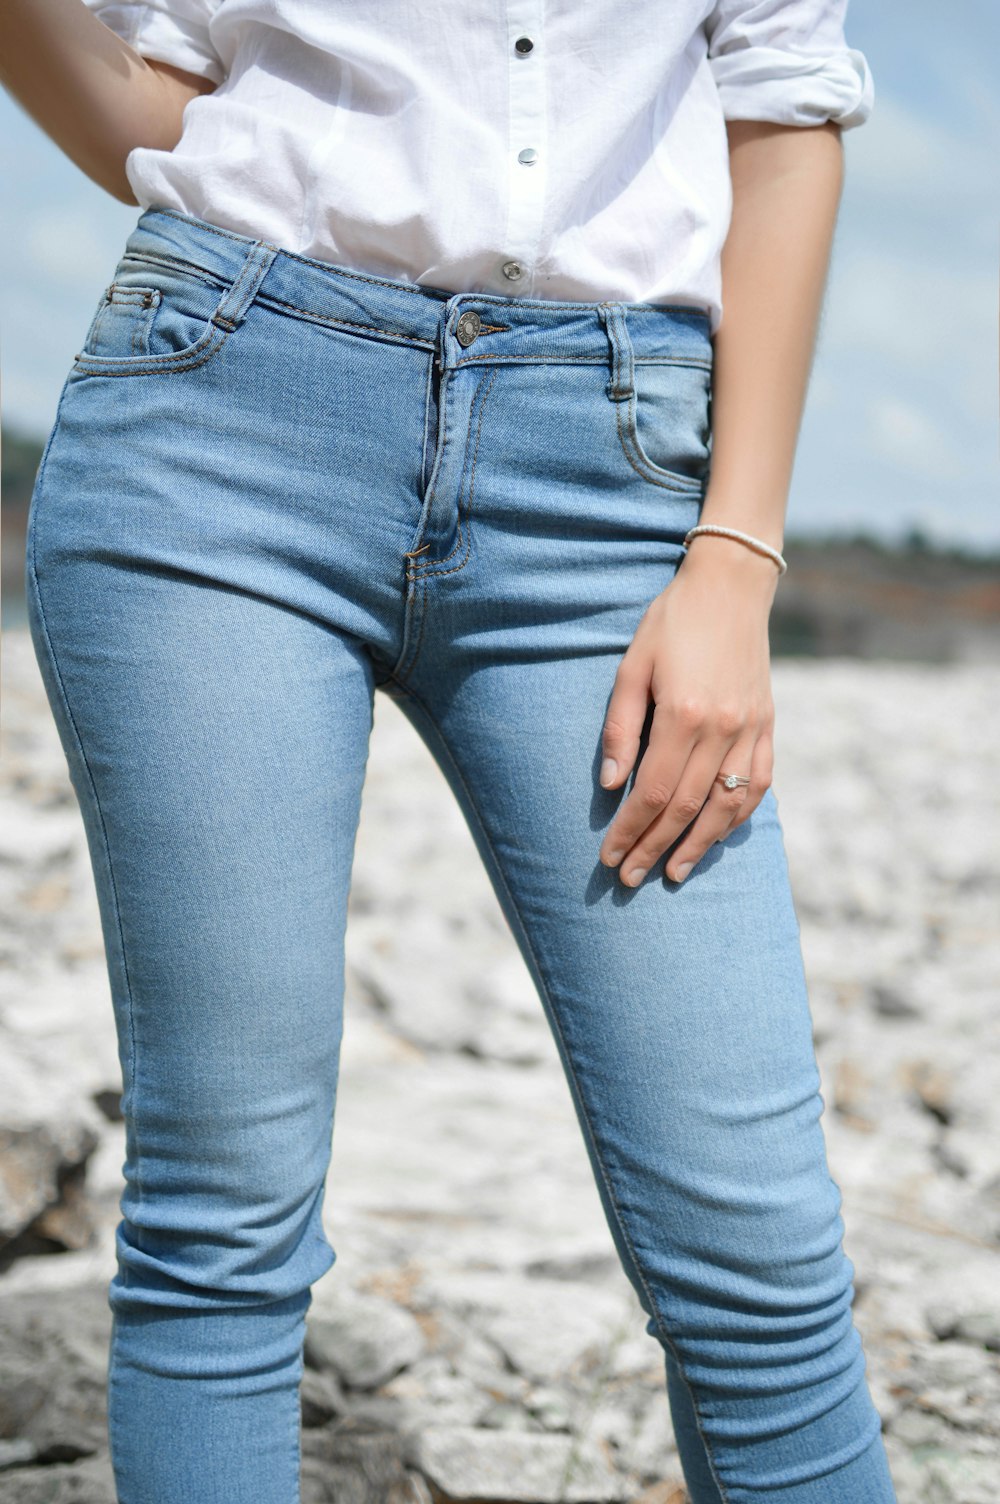 Skinny Jeans Pictures | Download Free Images on Unsplash